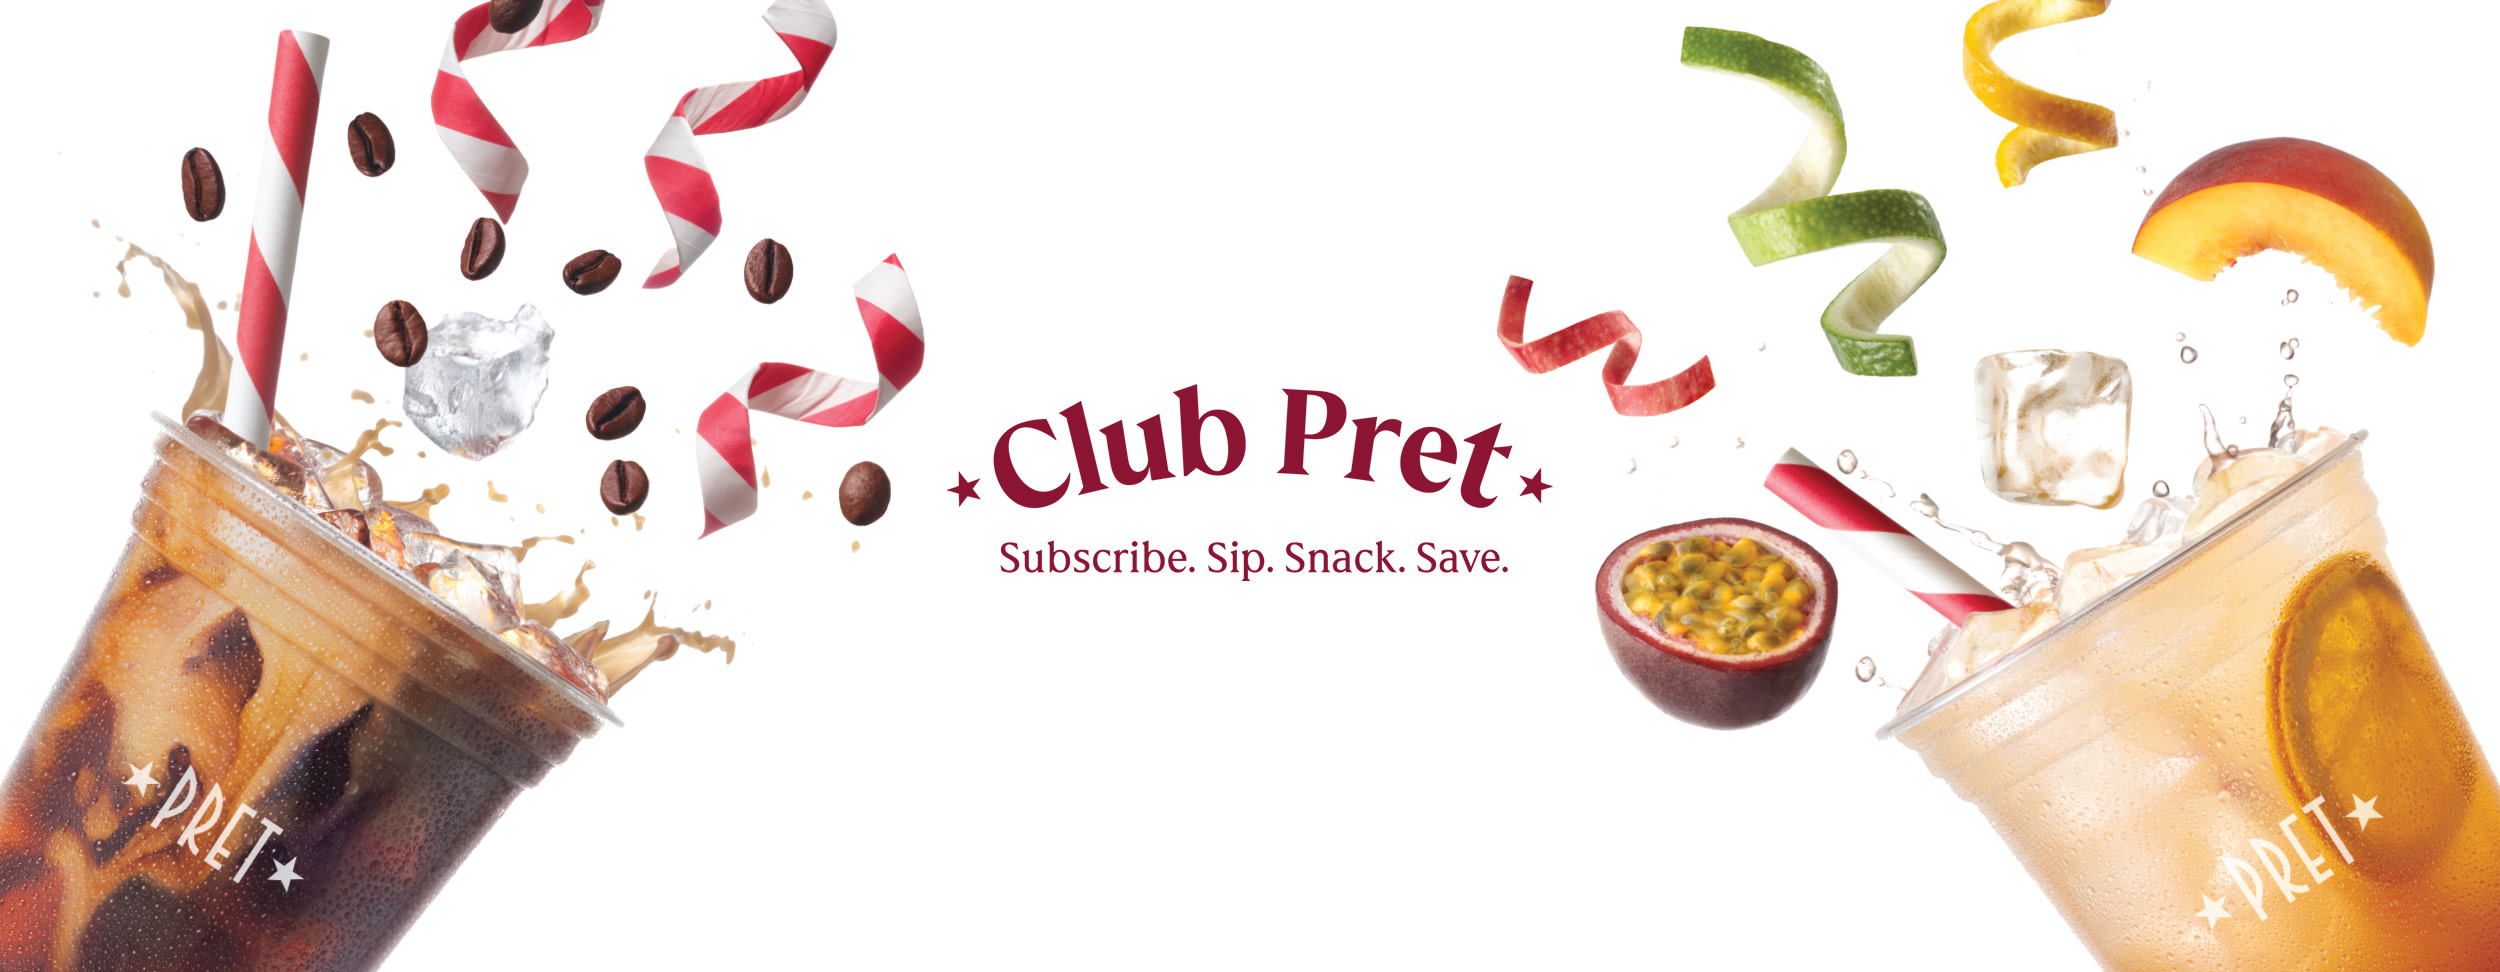 50% off your first month of Club Pret!